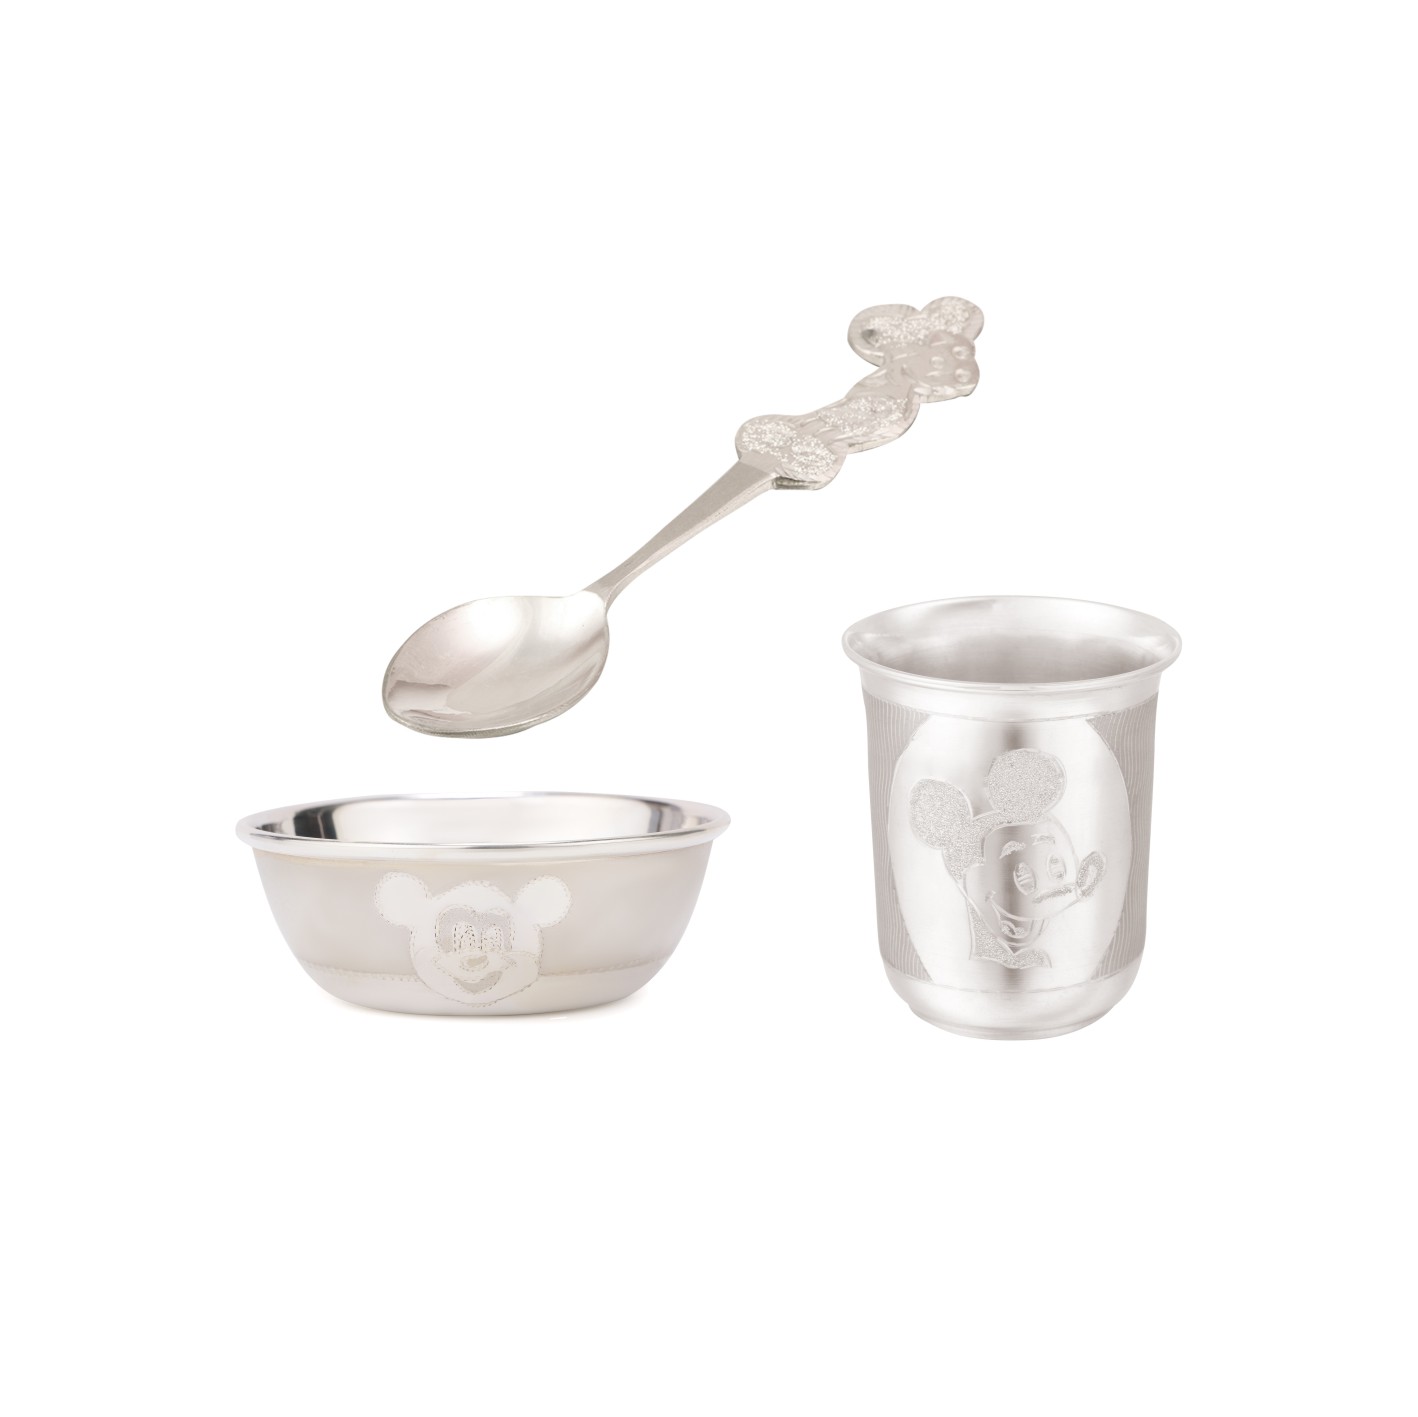 OSASMBGAS Mickey Glass,Bowl & Spoon Set in Silver by Osasbazaar Main